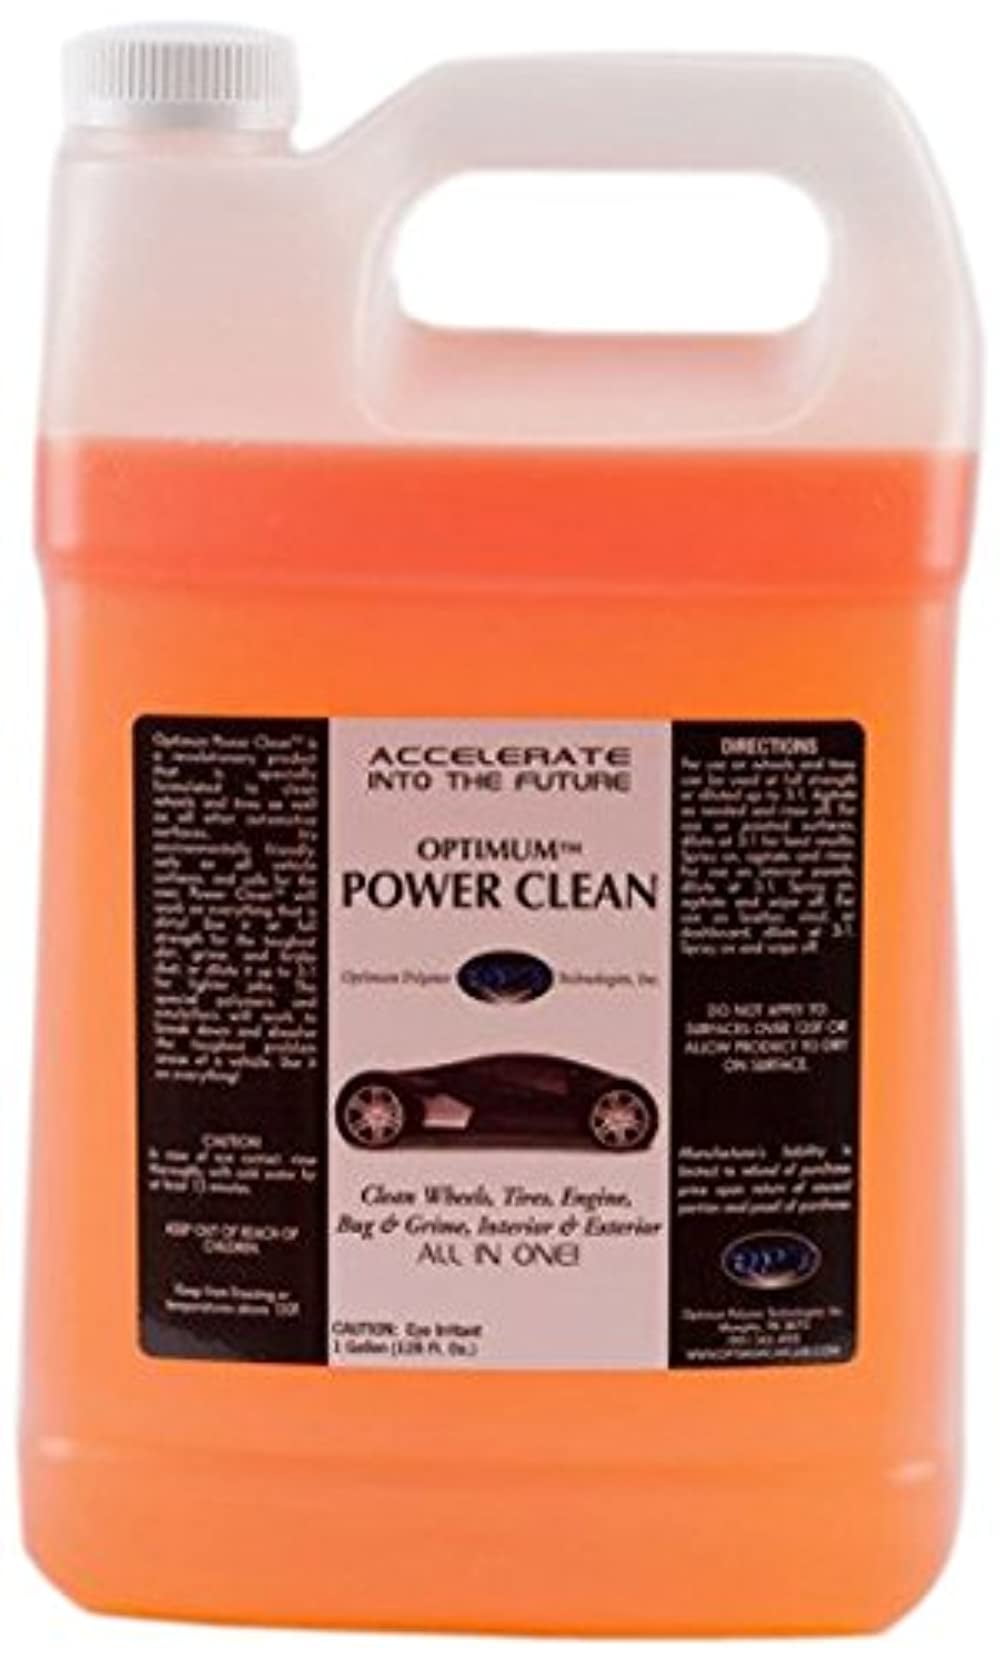 Car Cleaning Slime – Where Did You Buy This?